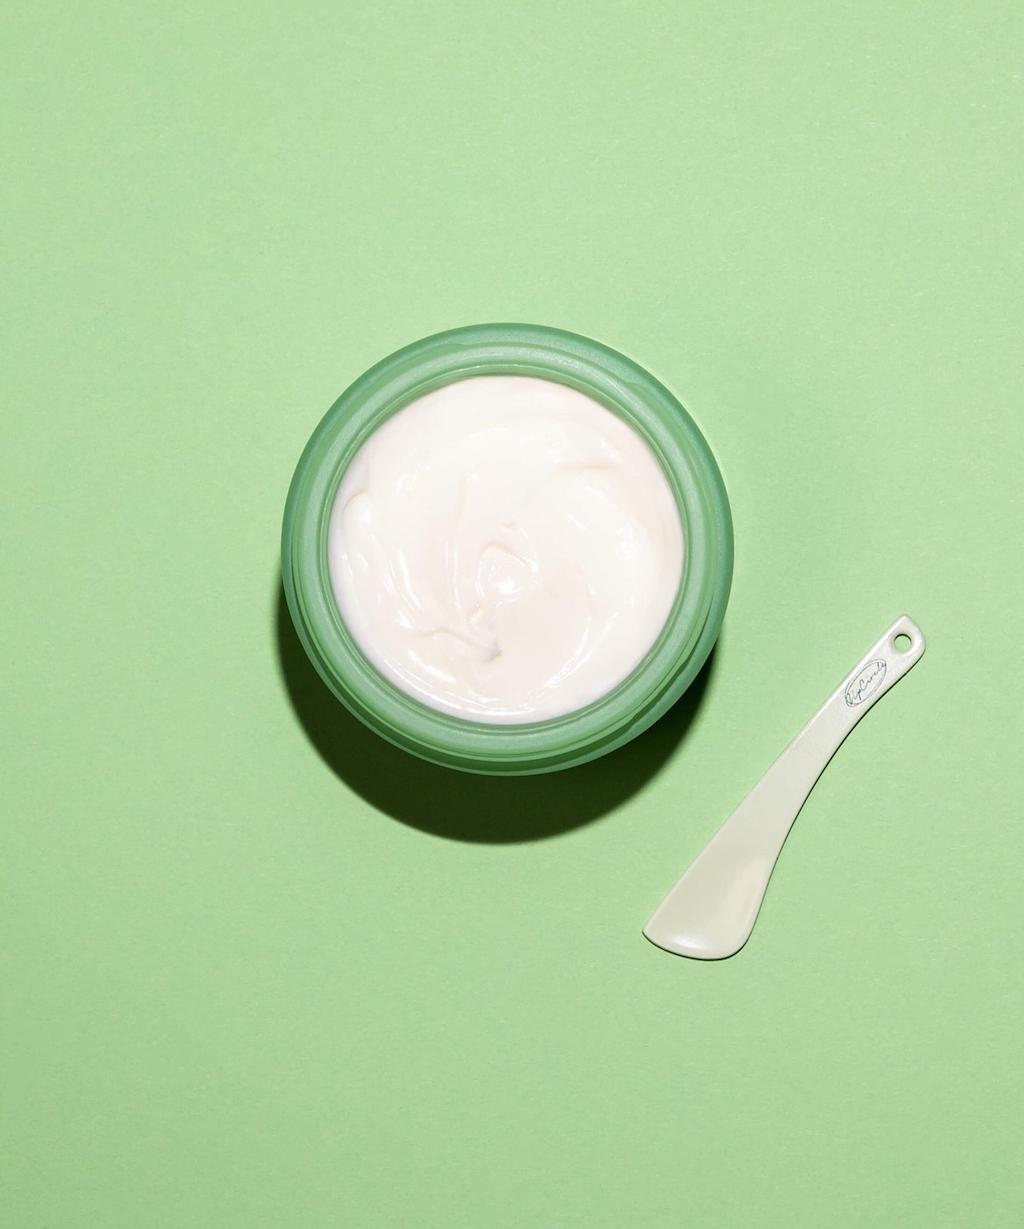 Upcircle Cosmetic Spatulas. Recyclable beauty accessories. One of the spatulas is pictured on a green surface, next to an open green pot of white cream product.